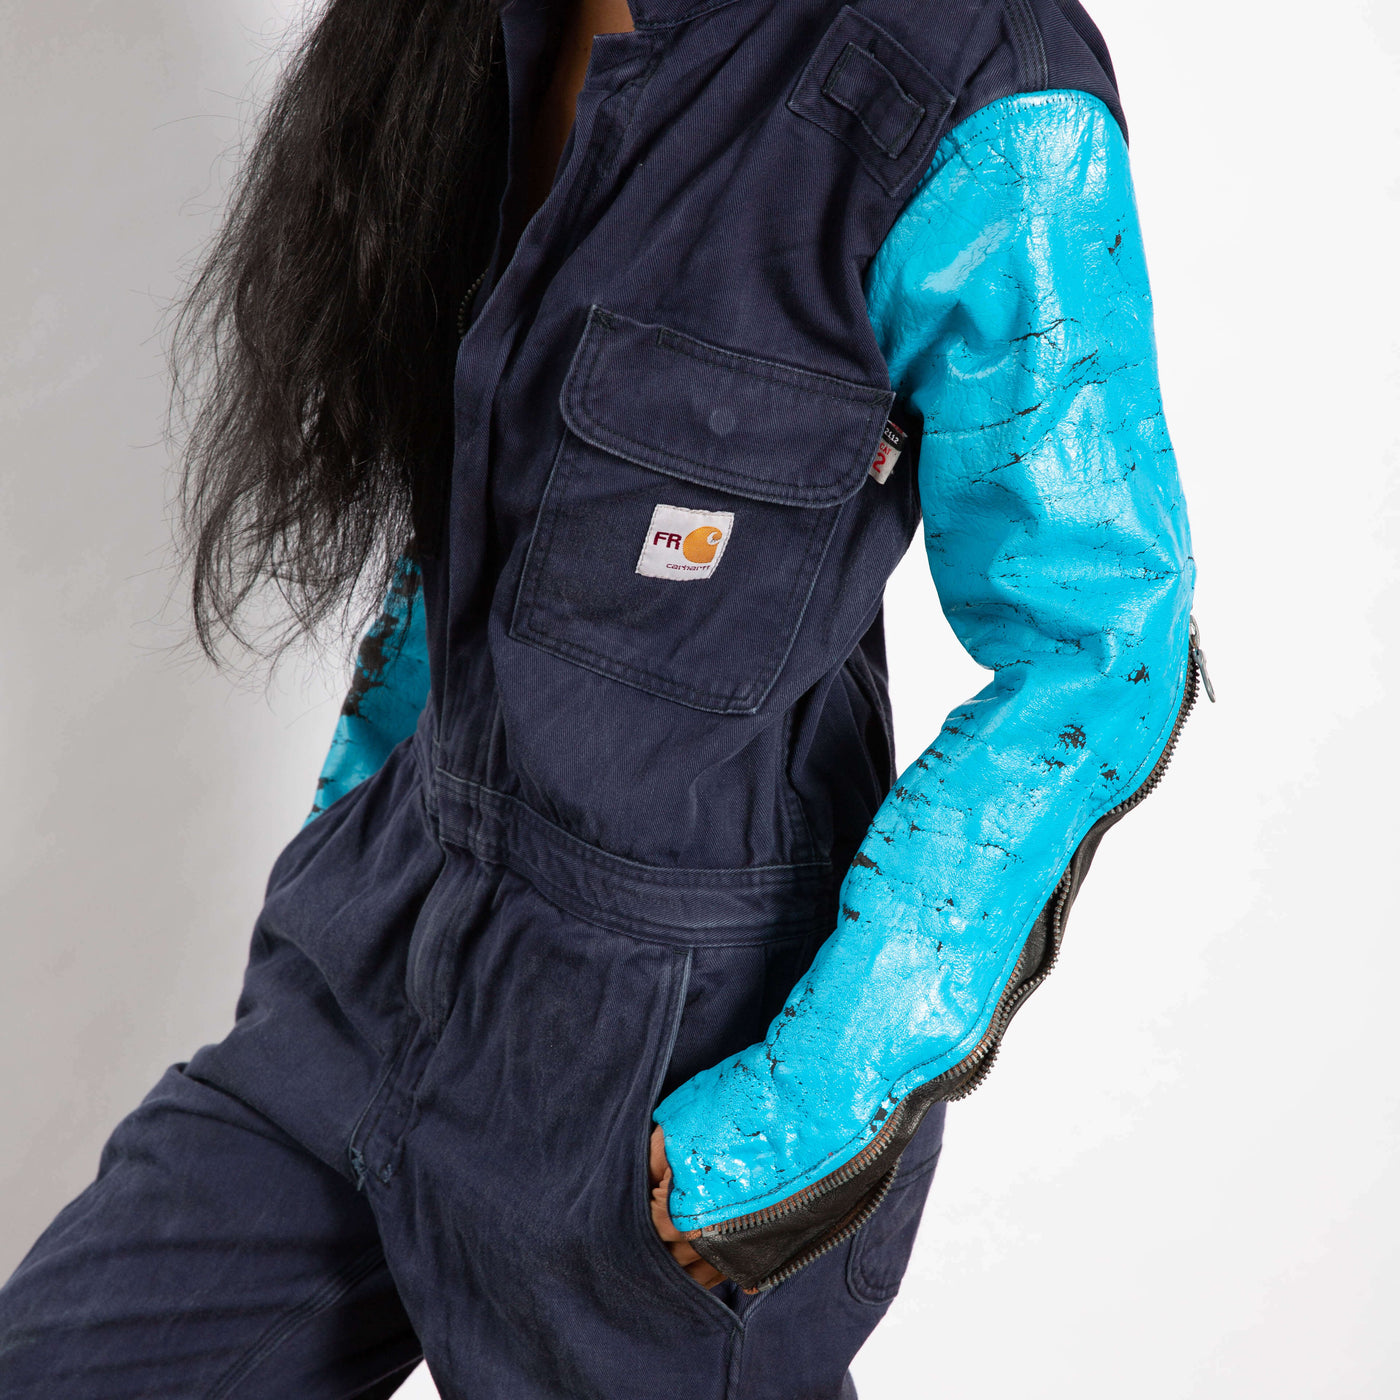 Model wears a jumpsuit that is dark navy blue and zipper up the front.  the sleeves are made of a different leather materials that is bright blue.  The paint is cracked showing black showing through.